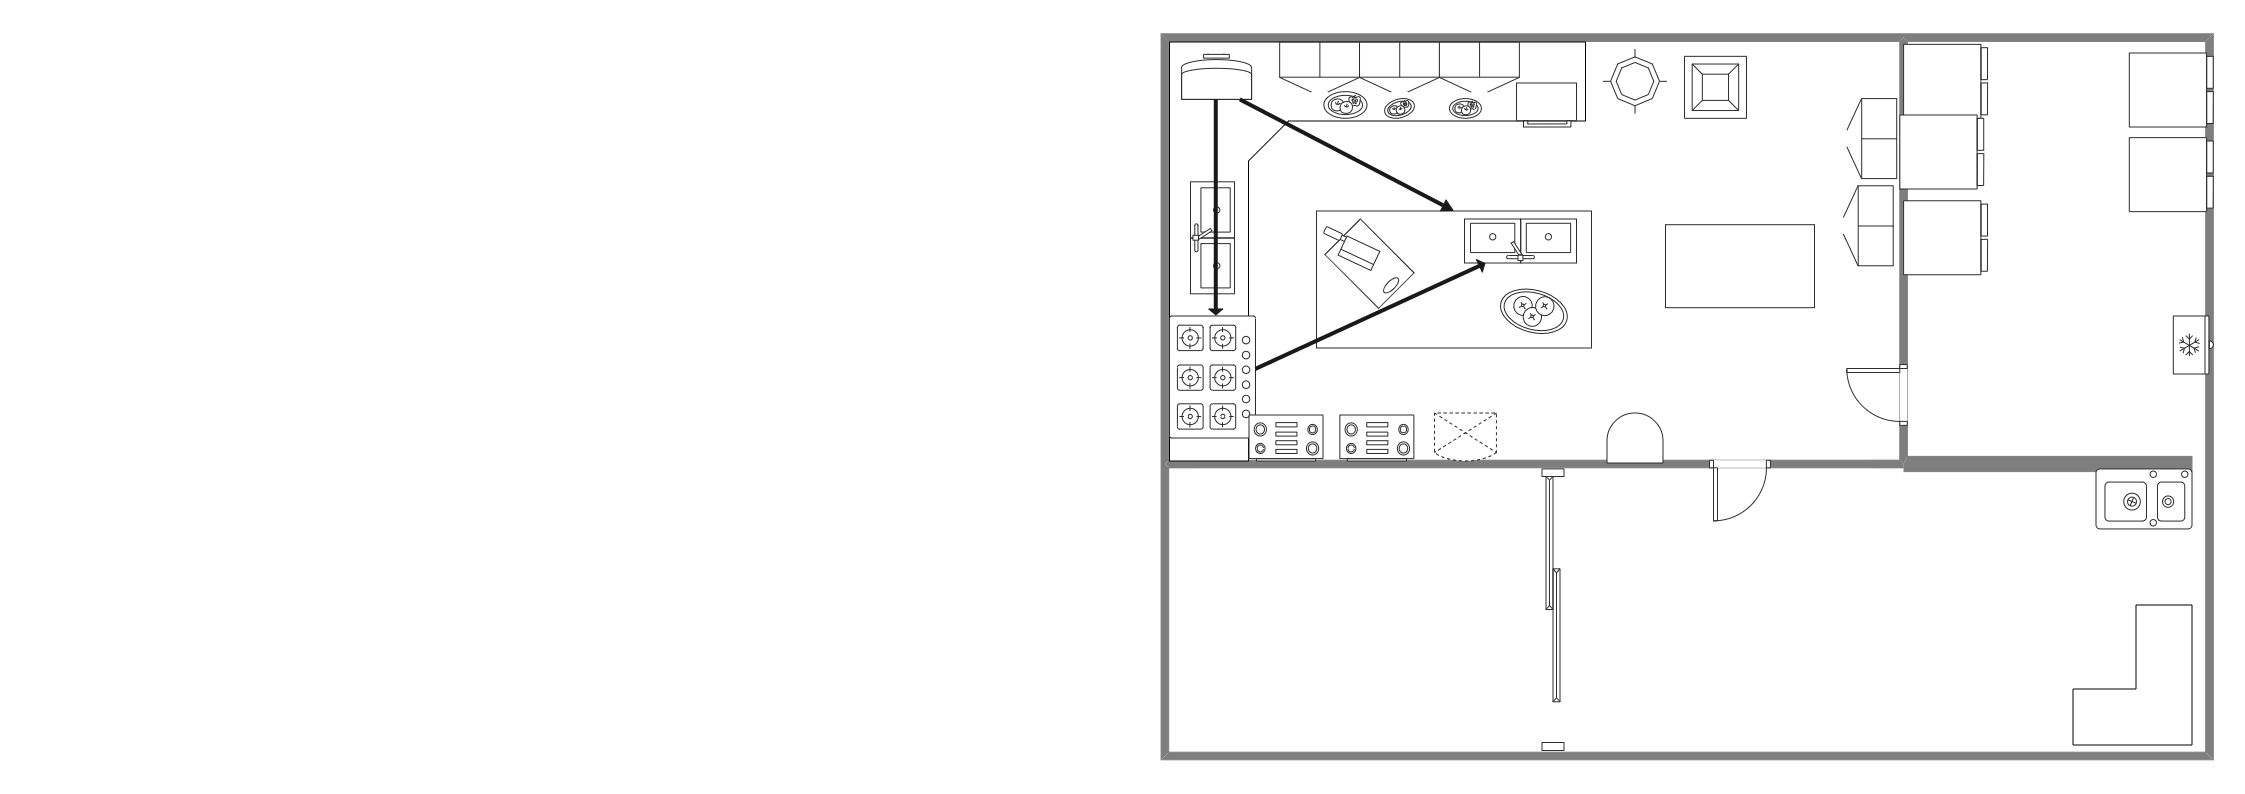 Detailed Kitchen Floor Plan shows important aspects of any kitchen, as seen from above. Strategic floor plans and space management, including furniture, displays, fixtures, lighting, and signage. As shown in the image, a detailed kitchen floor plan layout